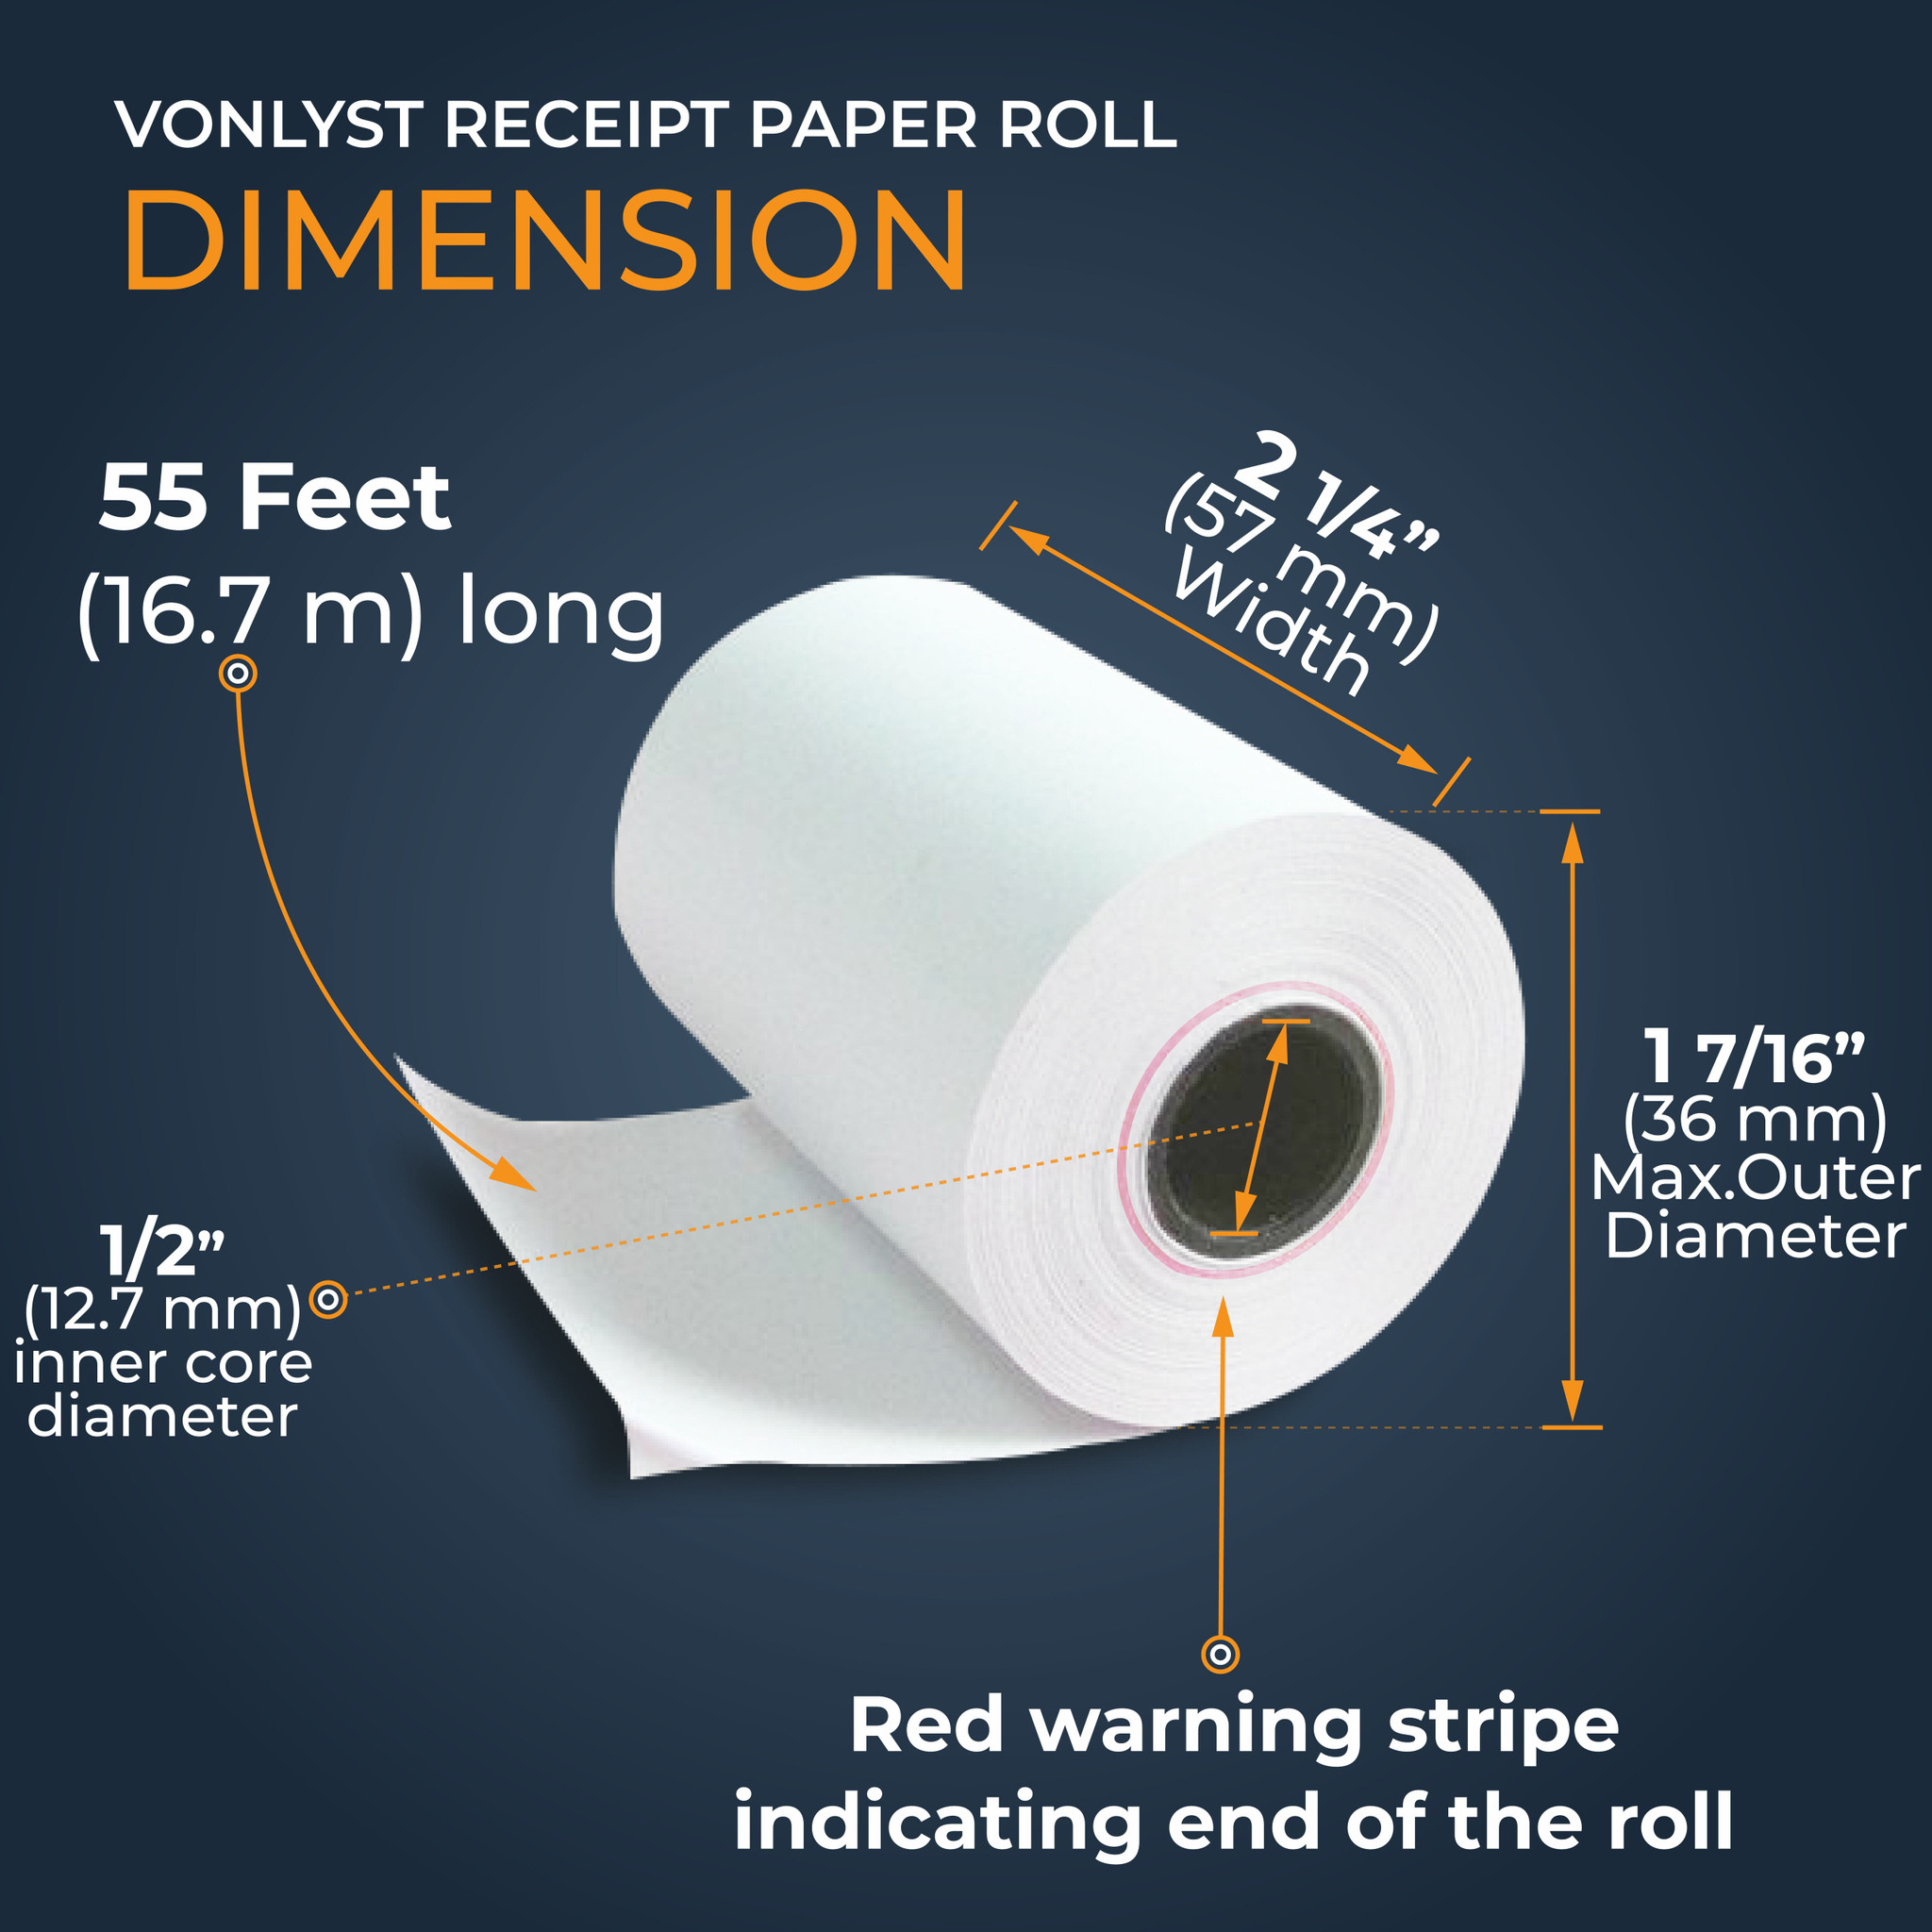 Square Terminal Receipt Paper Roll 2 1/4